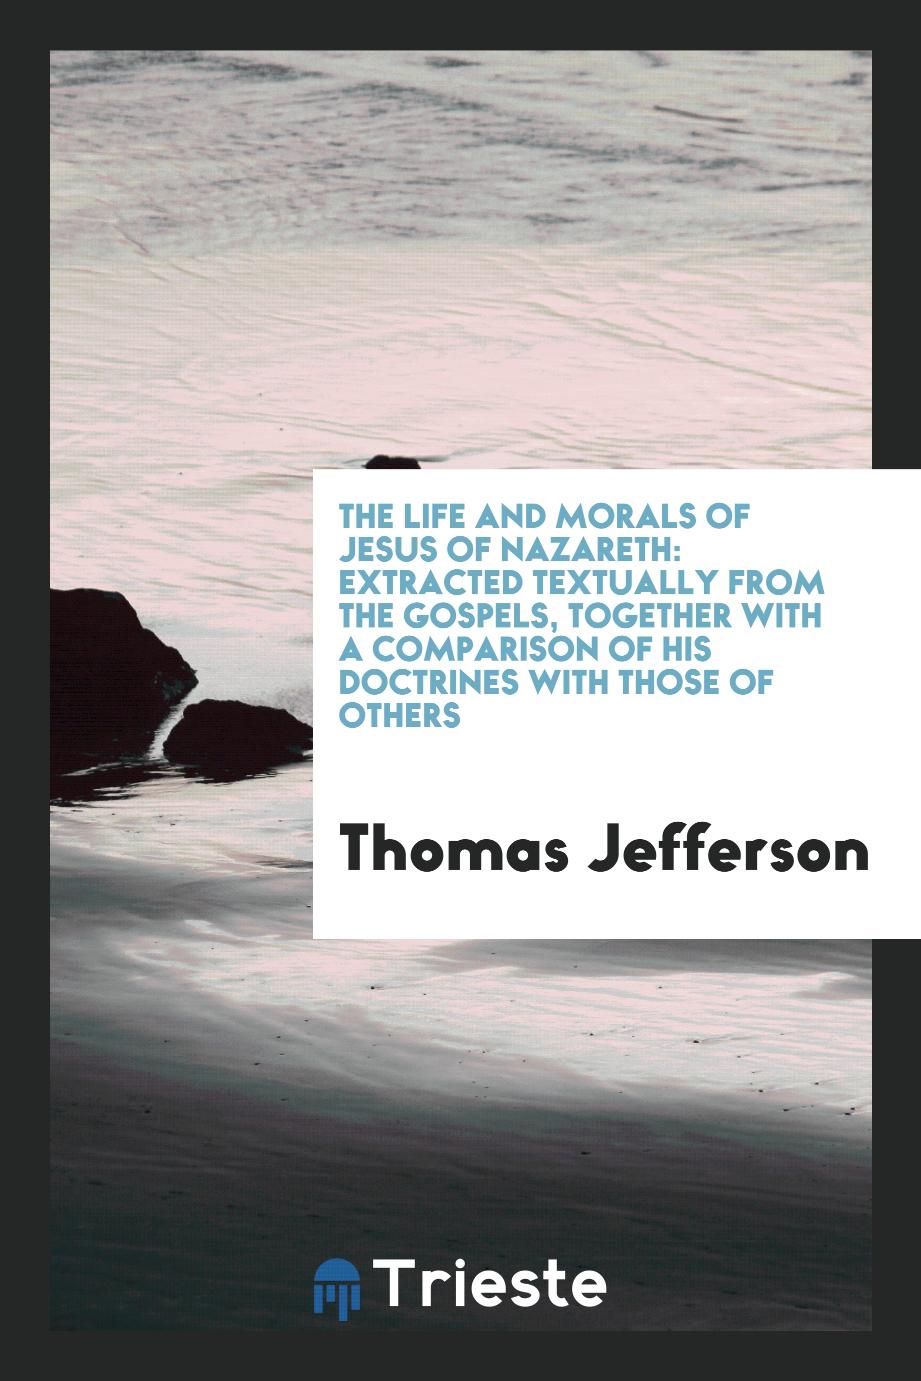 The life and morals of Jesus of Nazareth: extracted textually from the Gospels, together with a comparison of His doctrines with those of others